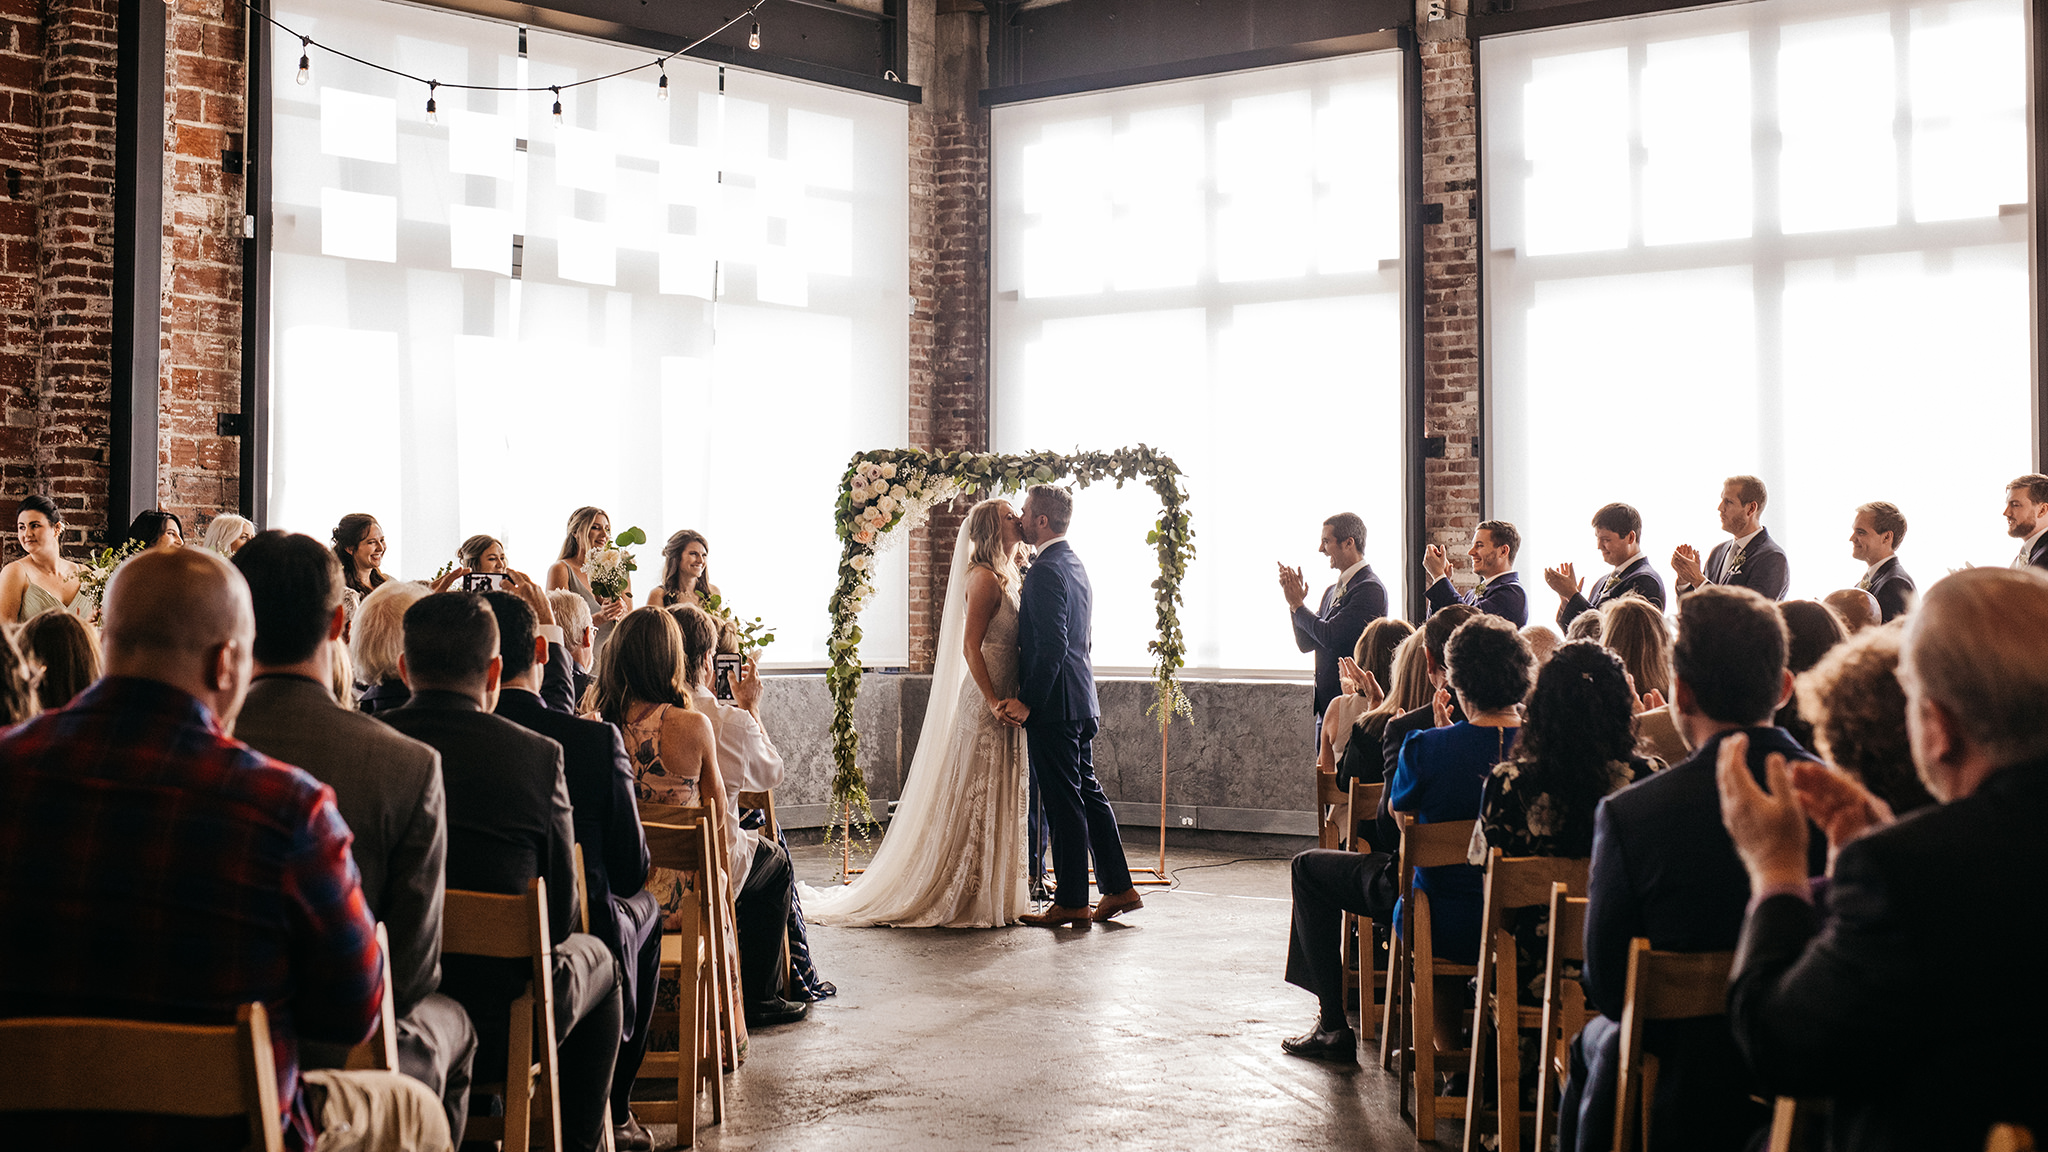 A bride and groom's first kiss during their Leftbank Annex wedding ceremony, an industrial Portland wedding venue